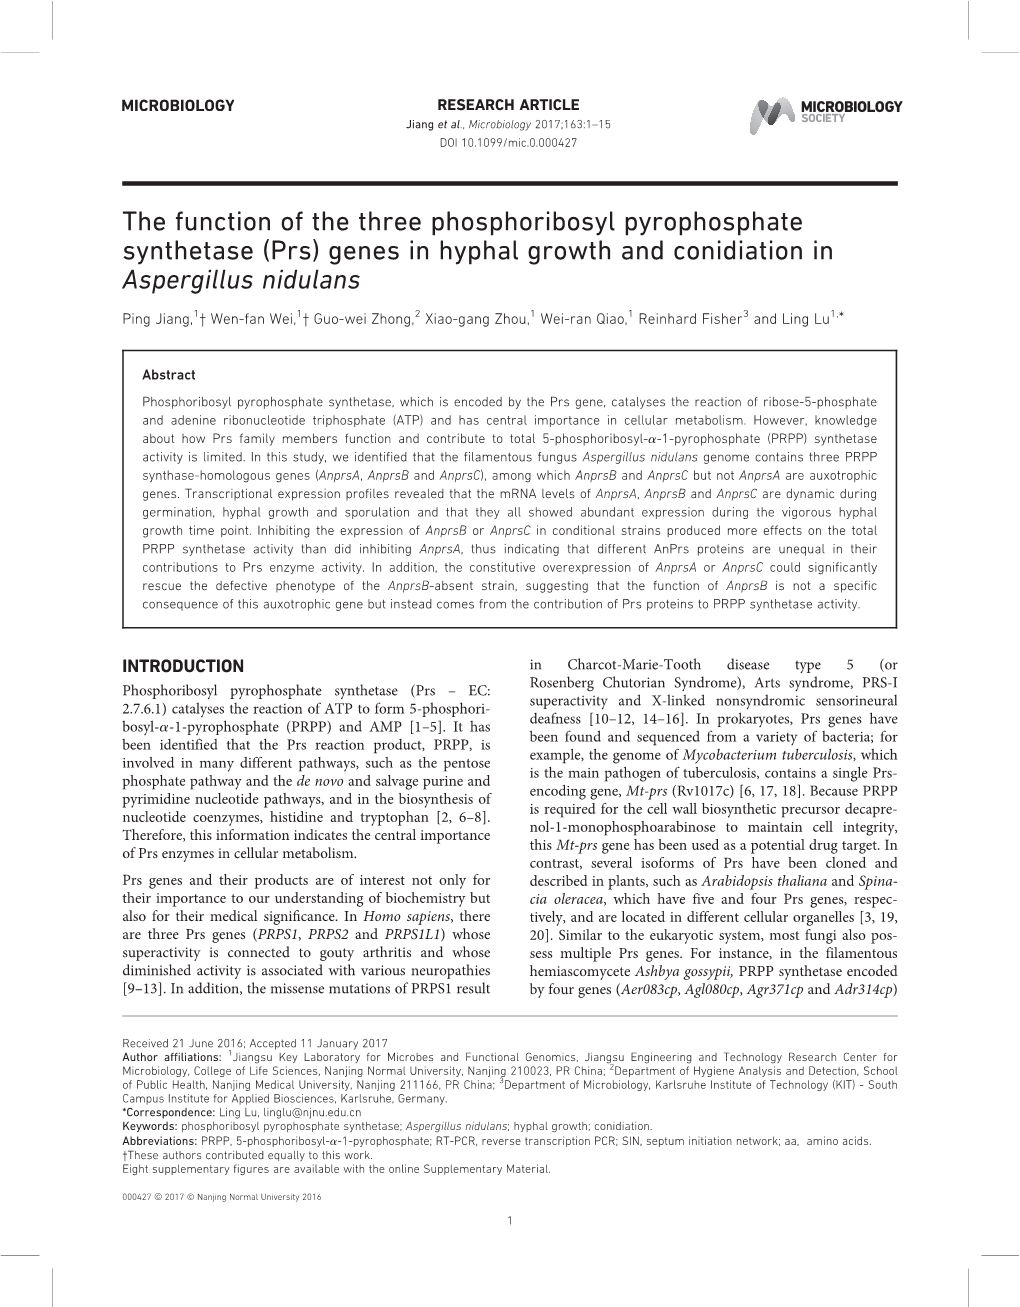 The Function of the Three Phosphoribosyl Pyrophosphate Synthetase (Prs) Genes in Hyphal Growth and Conidiation in Aspergillus Nidulans